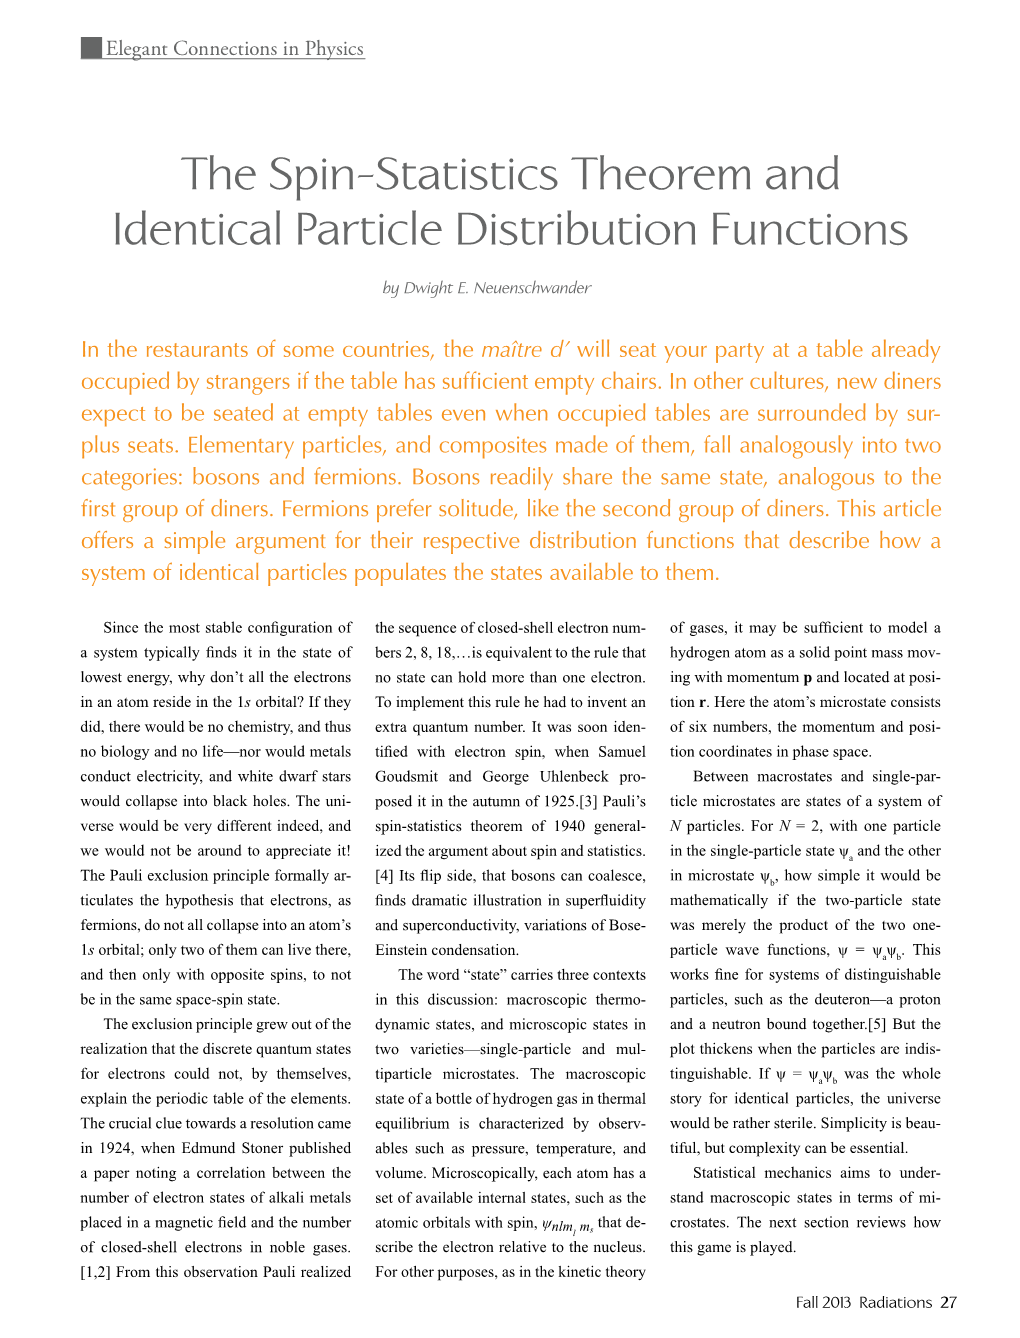 The Spin-Statistics Theorem and Identical Particle Distribution Functions